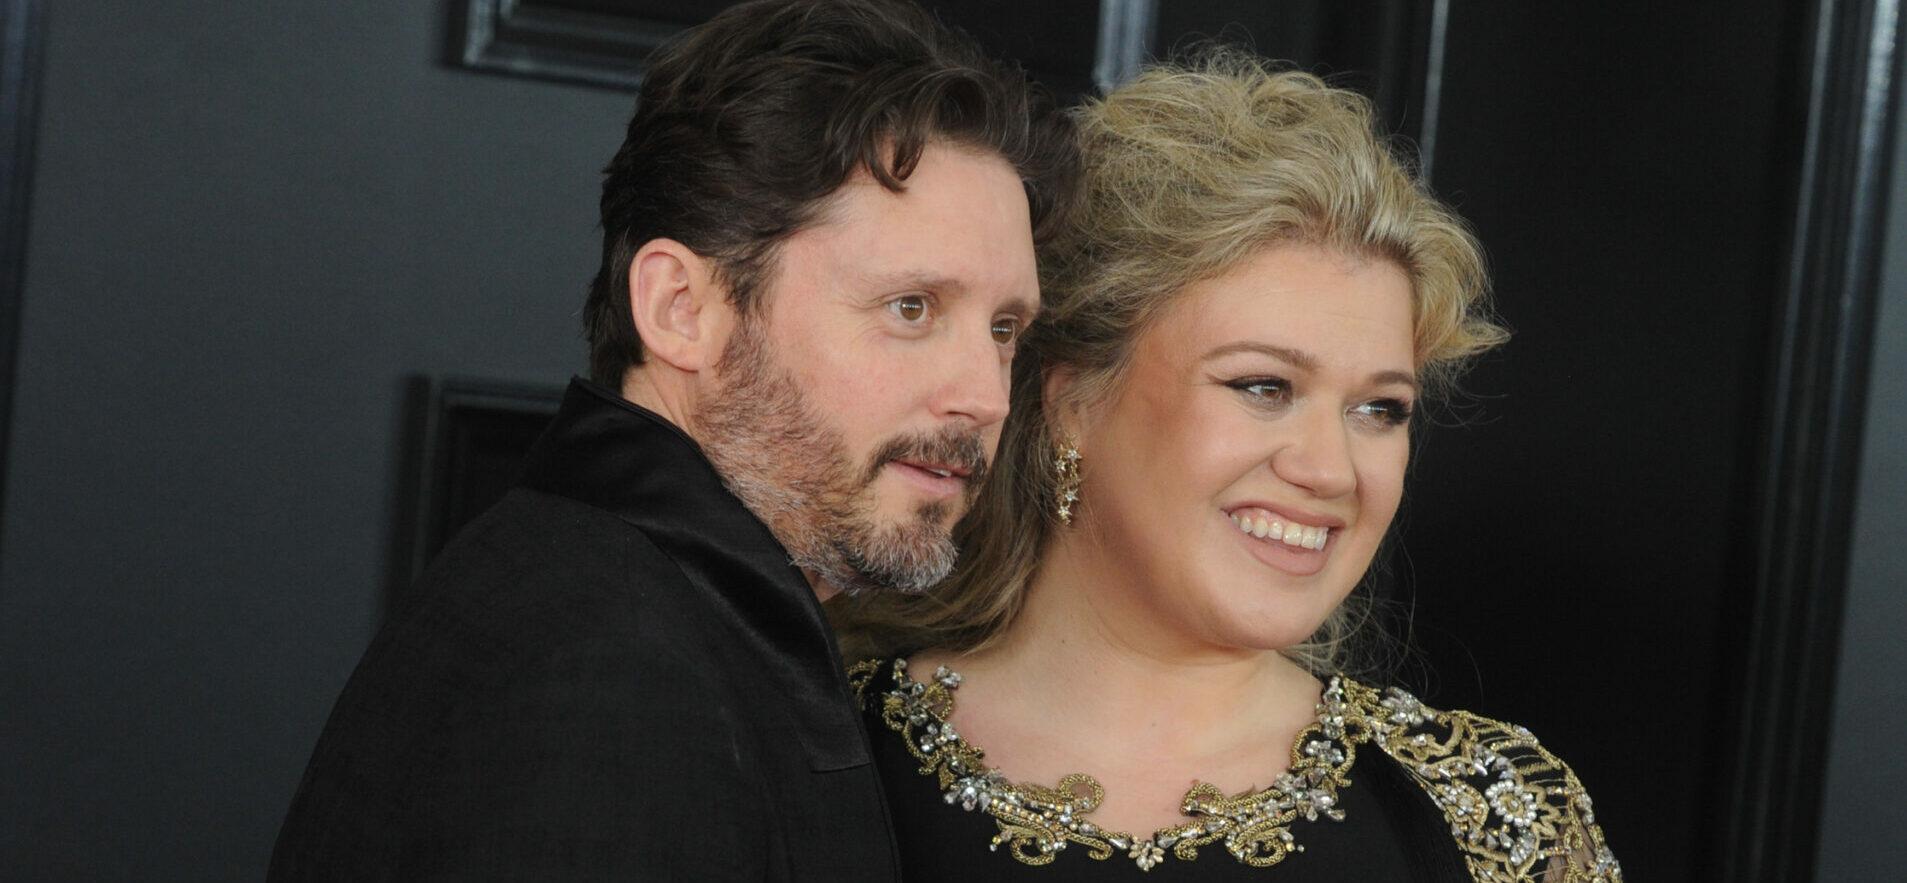 Kelly Clarkson Officially Files To Have Her Famous Name Restored In Divorce